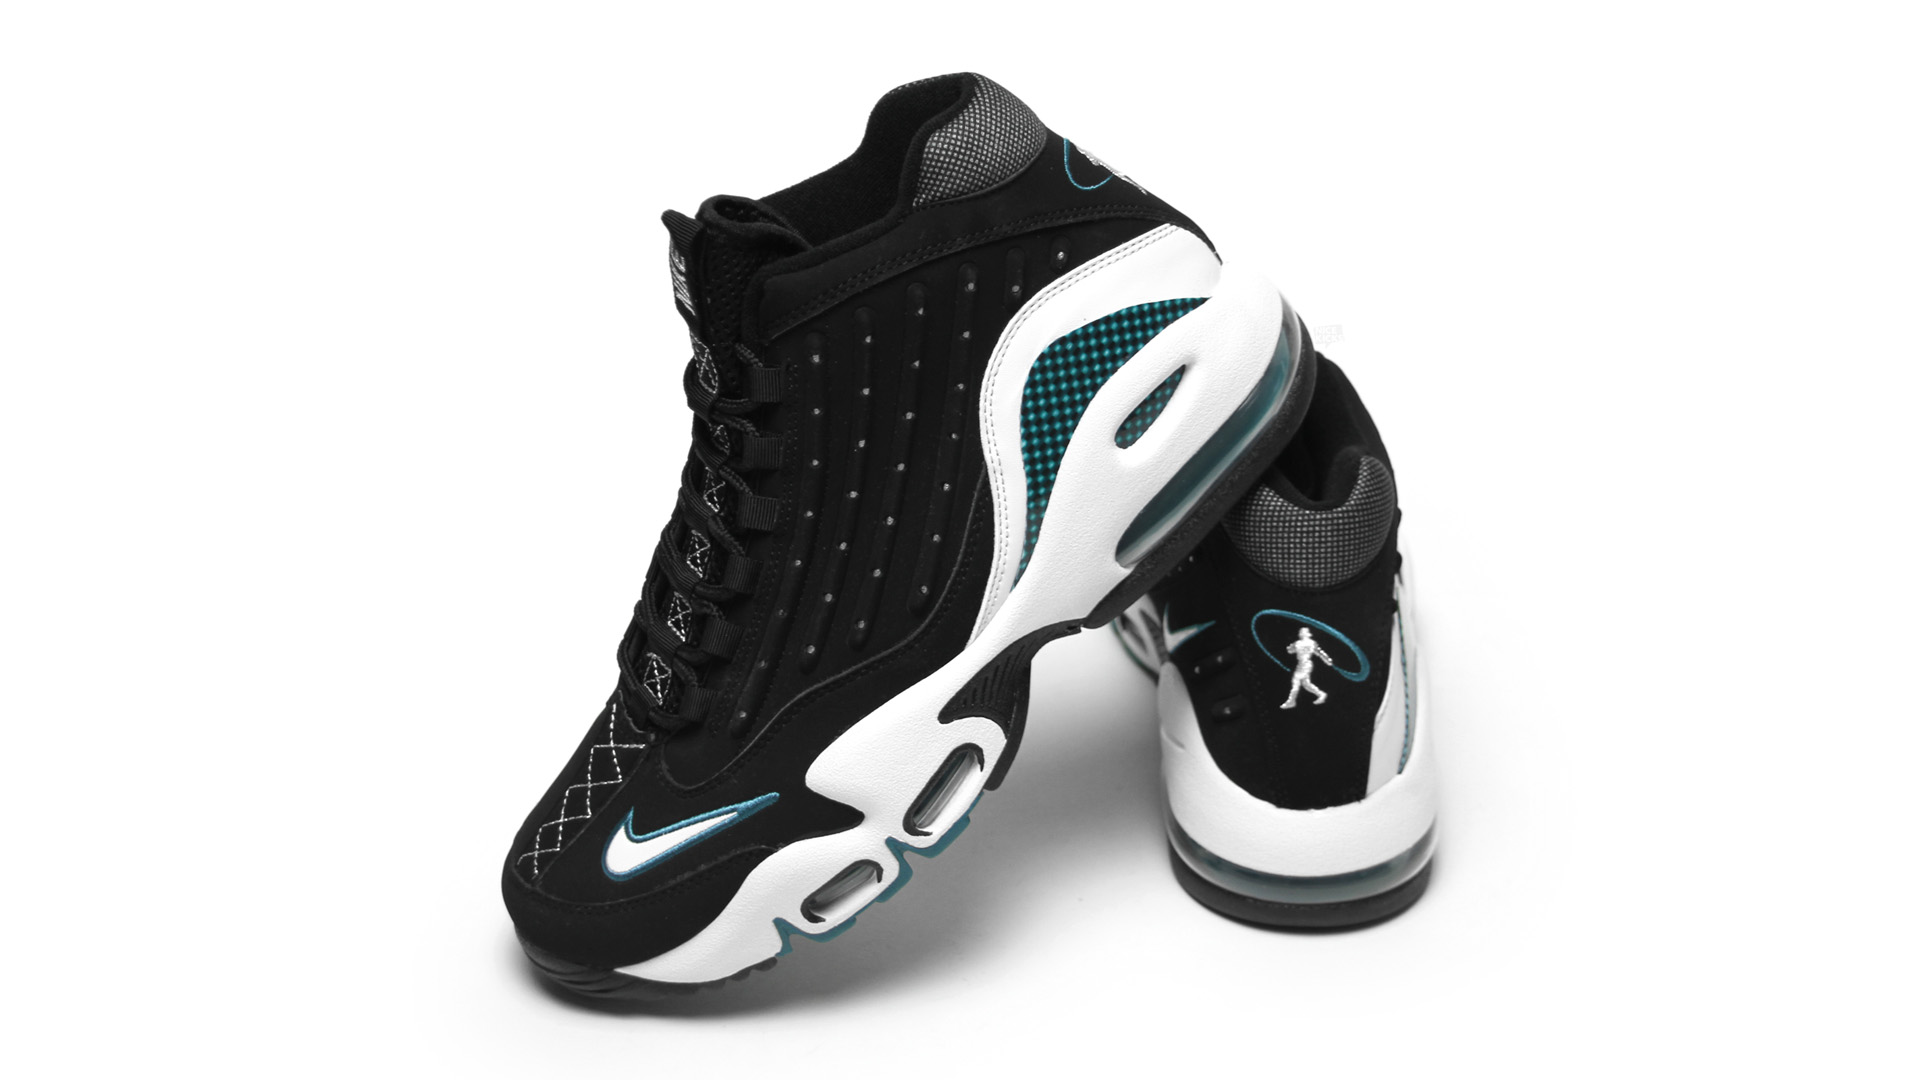 Nike Shoes Photos Download The BEST Free Nike Shoes Stock Photos  HD  Images